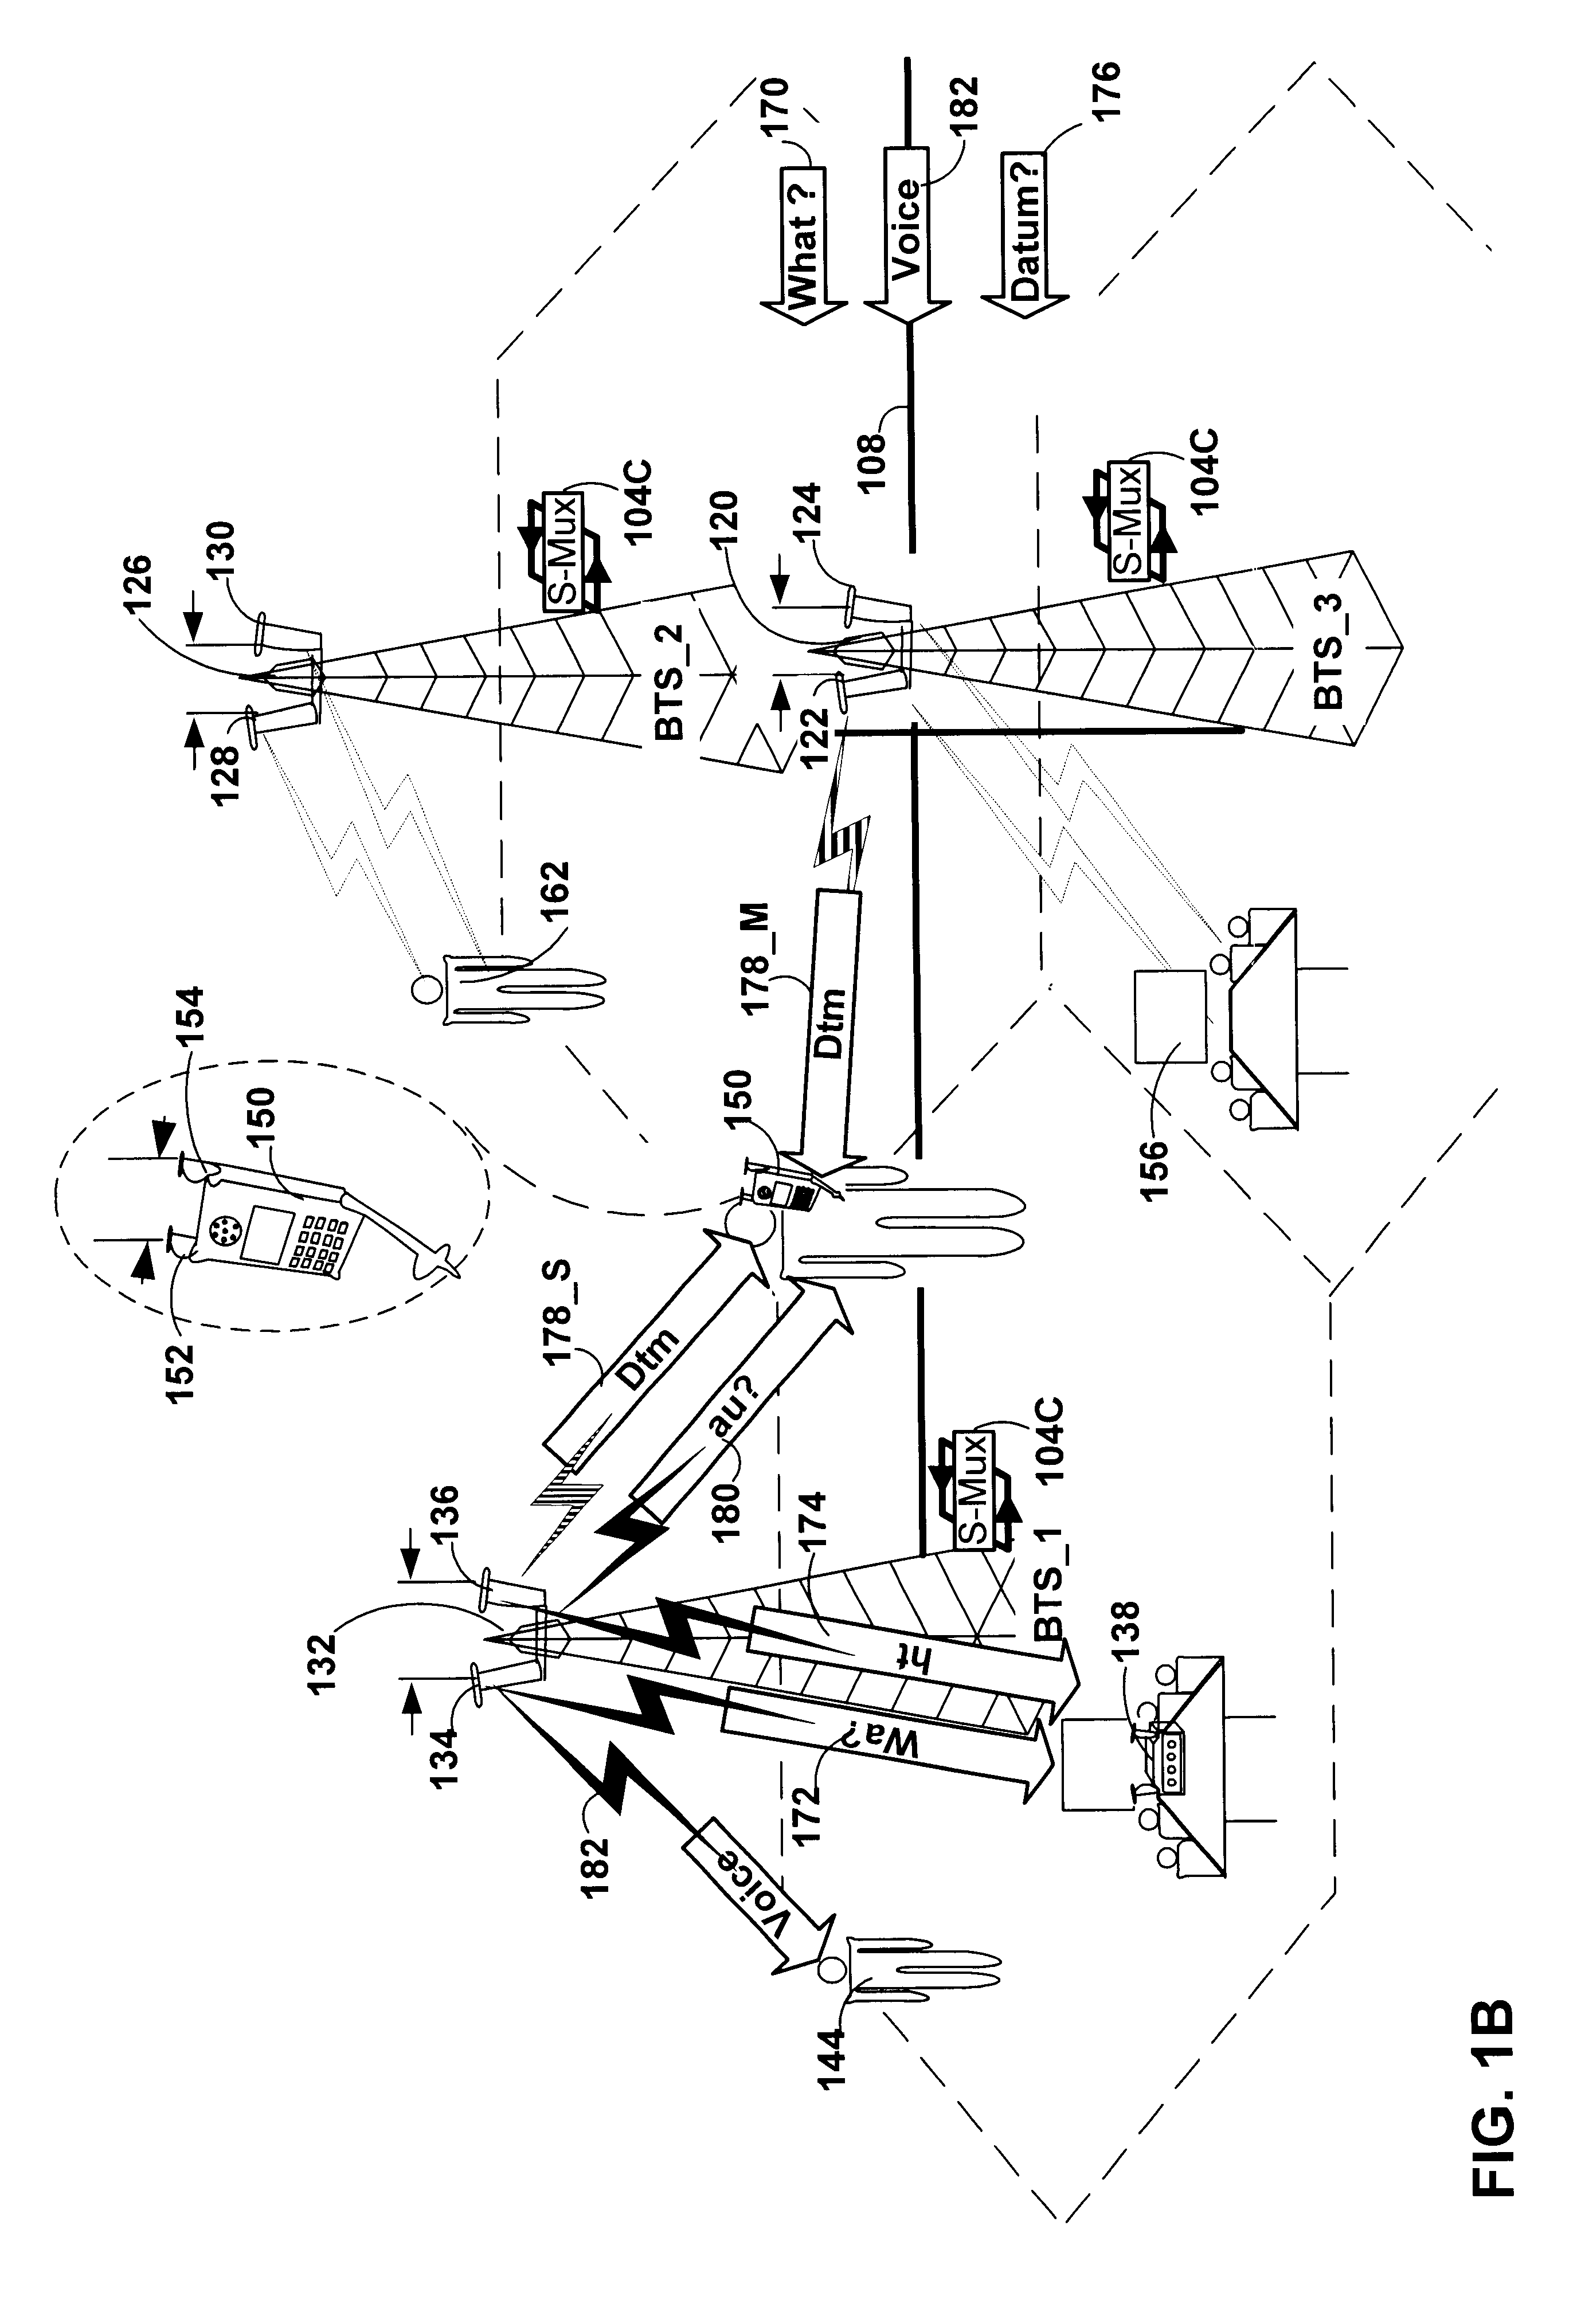 Subscriber unit in a hybrid link incorporating spatial multiplexing